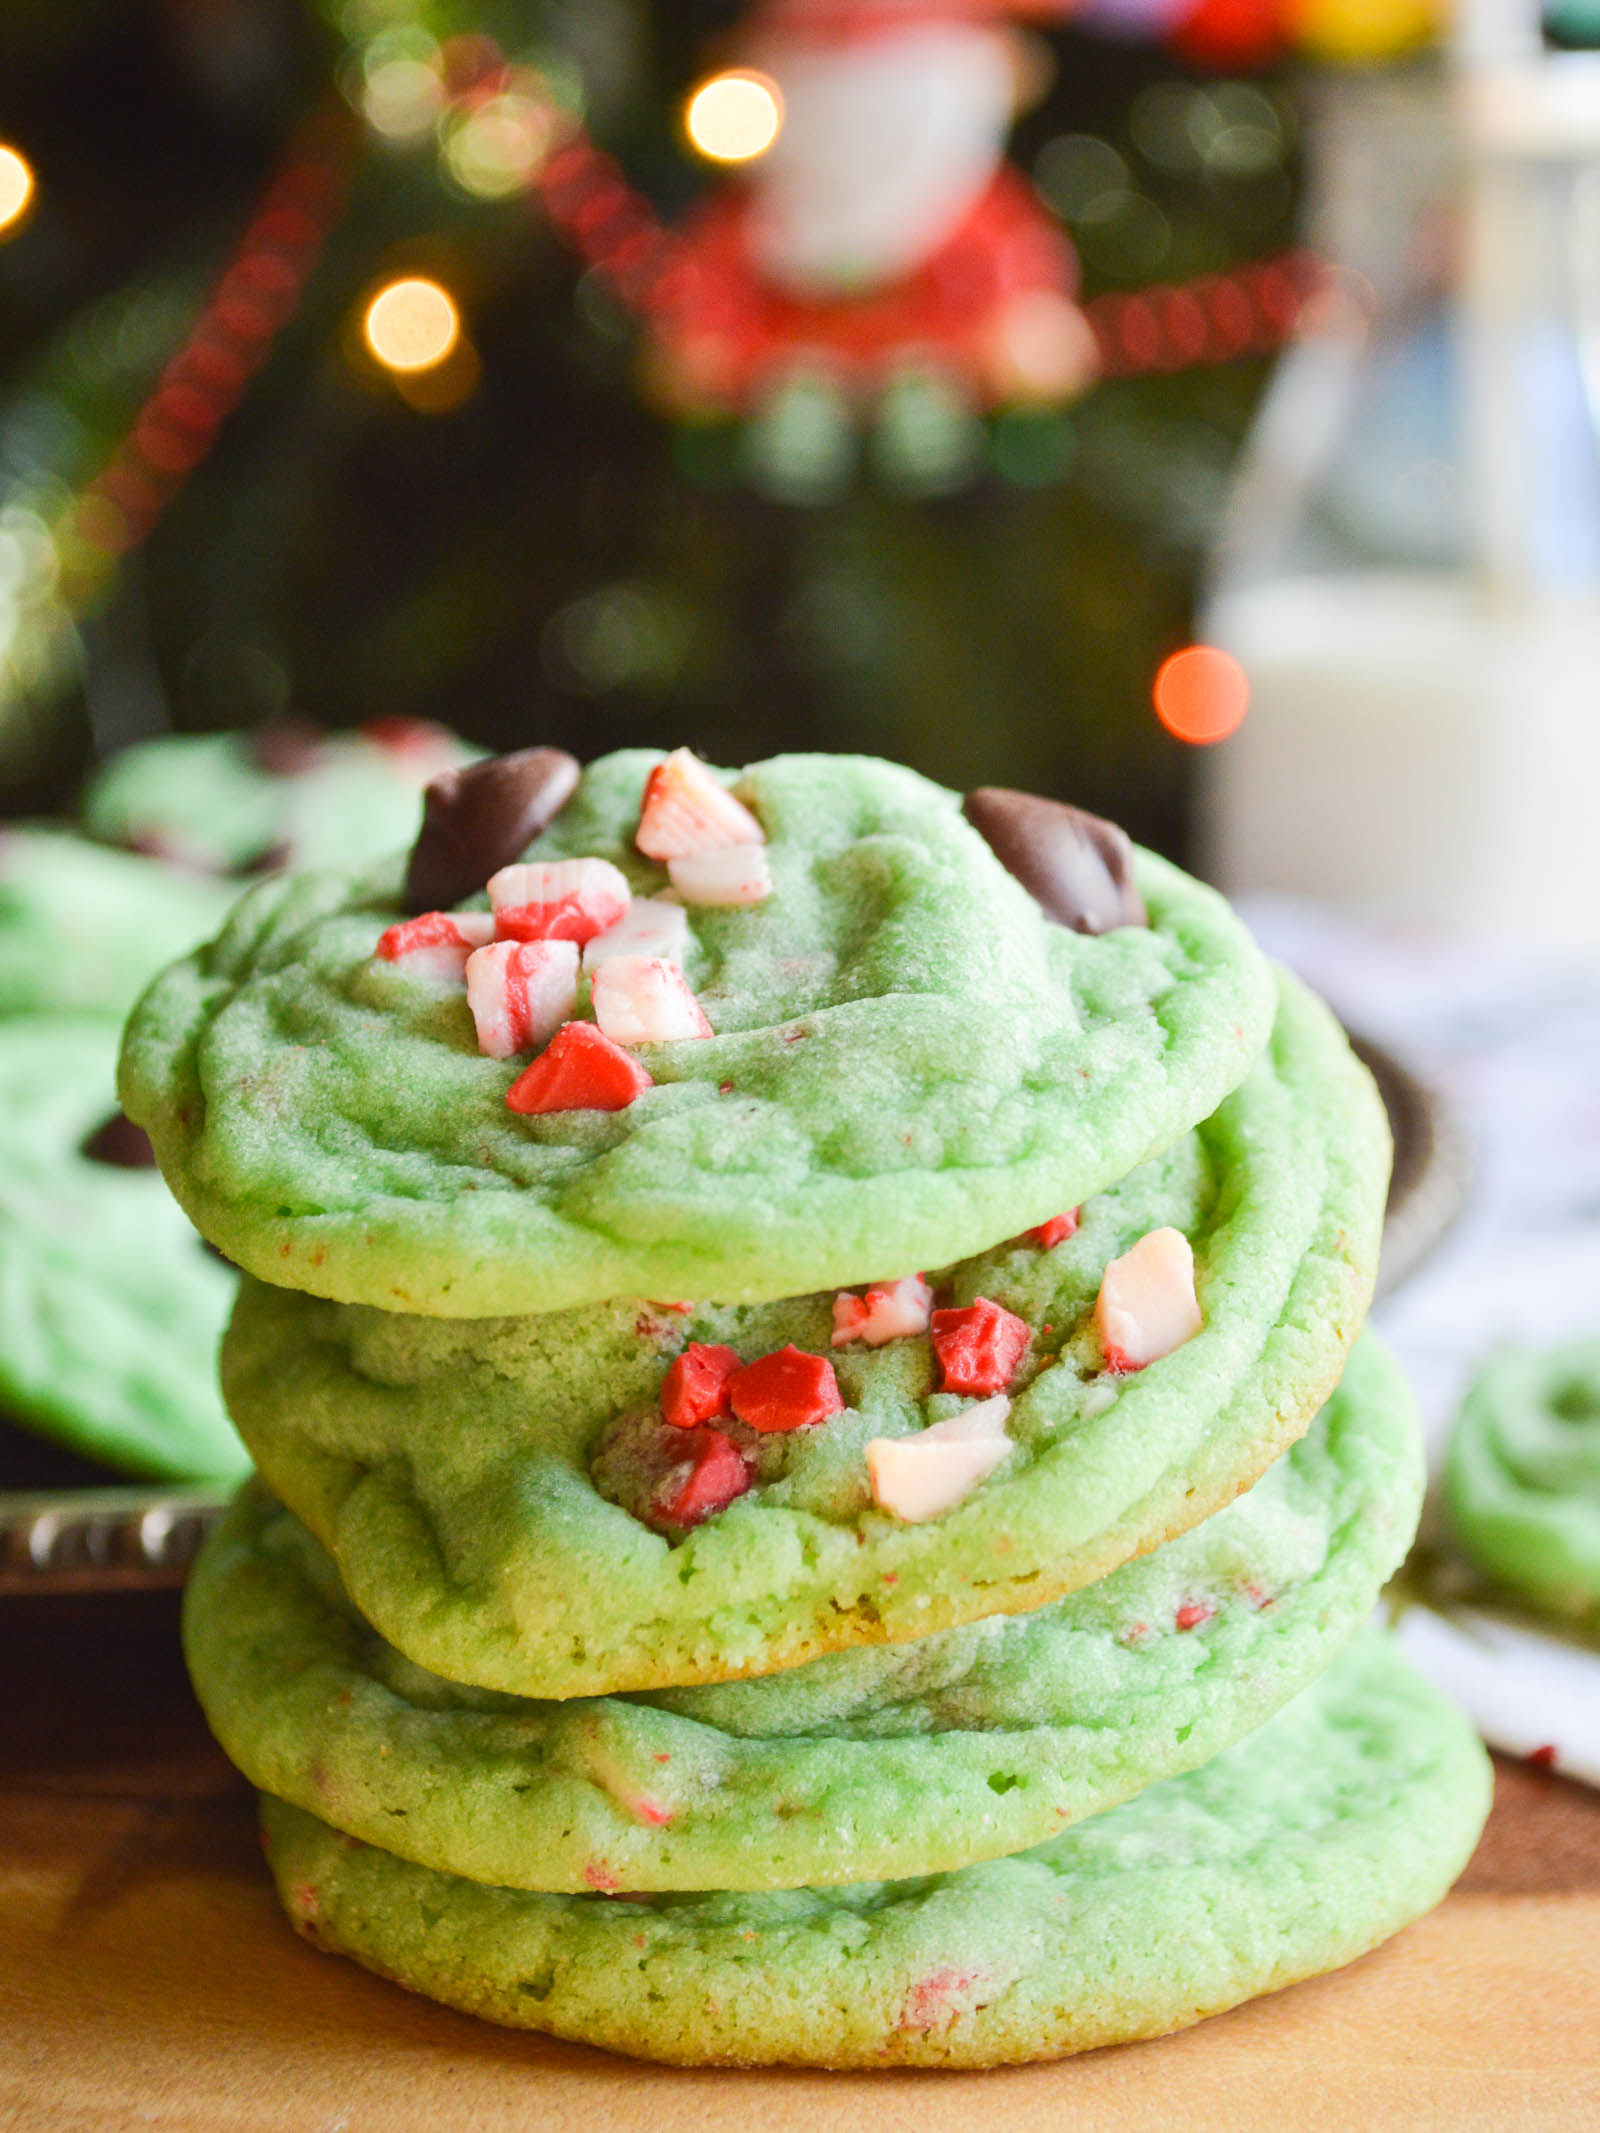 The Grinch' recipe for Christmas